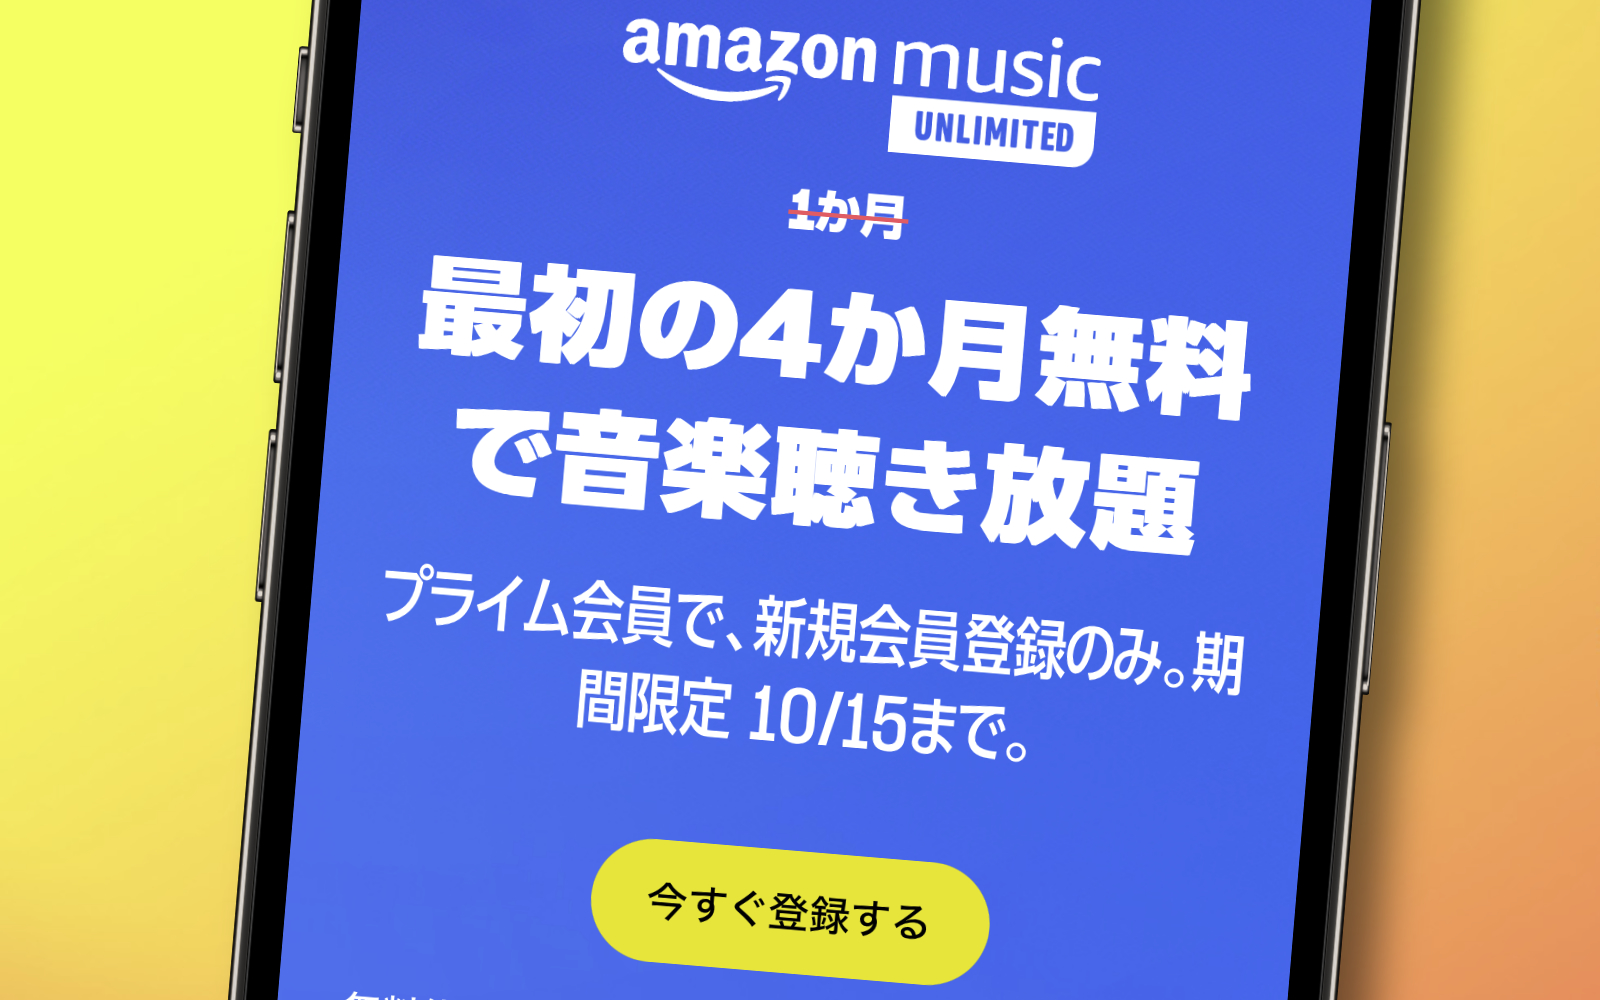 Amazon music 4month free campaign